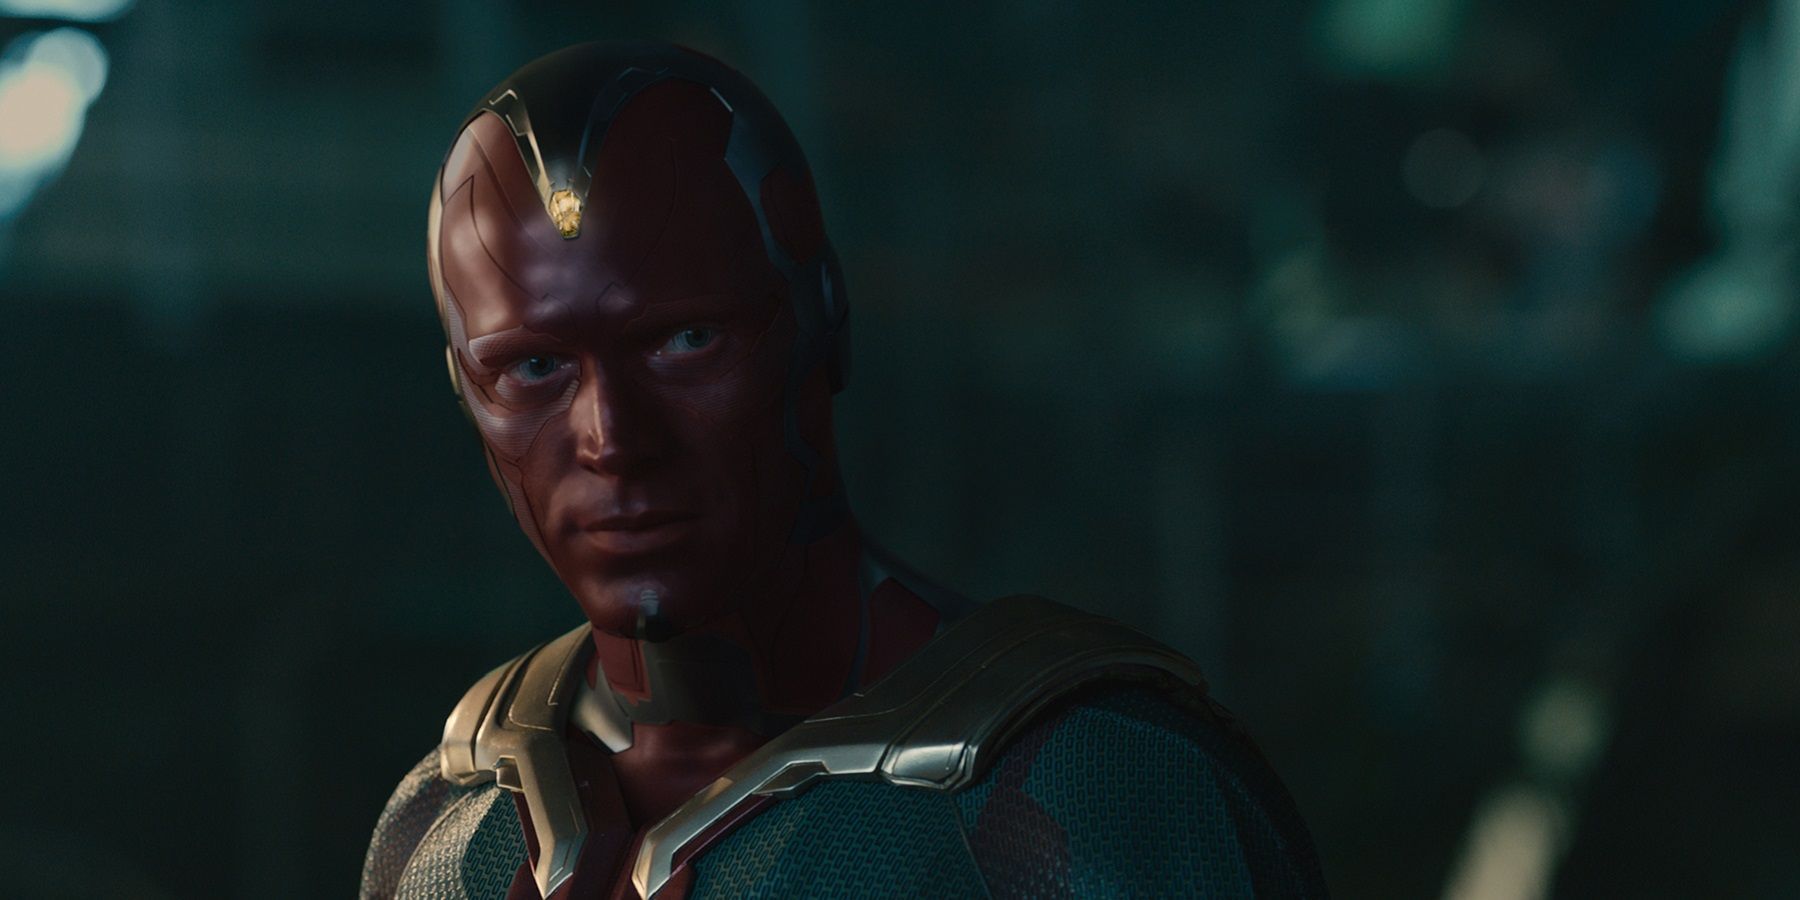 Paul Bettany as Vision in Avengers Age of Ultron